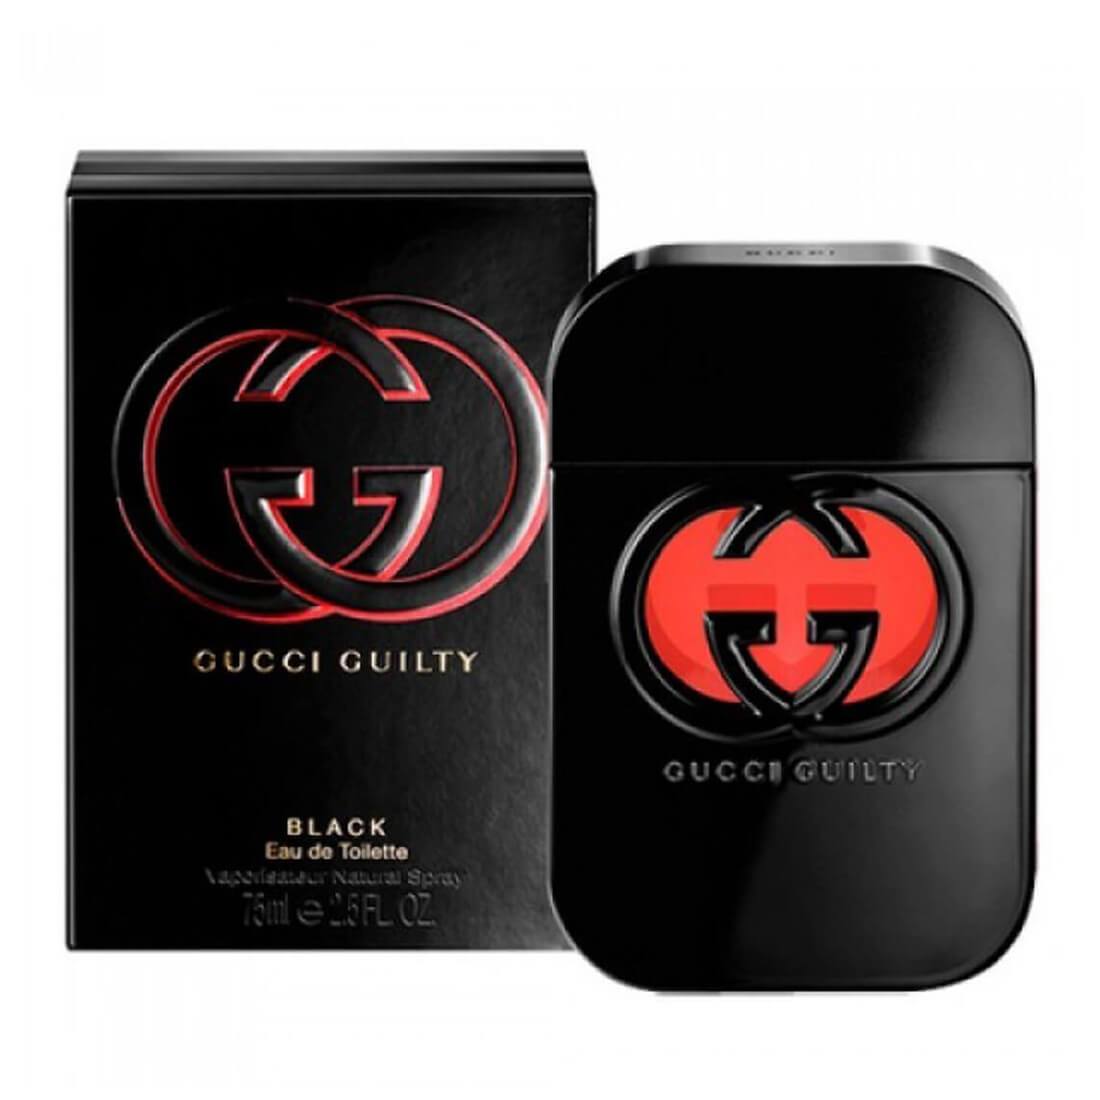 Gucci Guilty Black Perfume For Women - 75ml